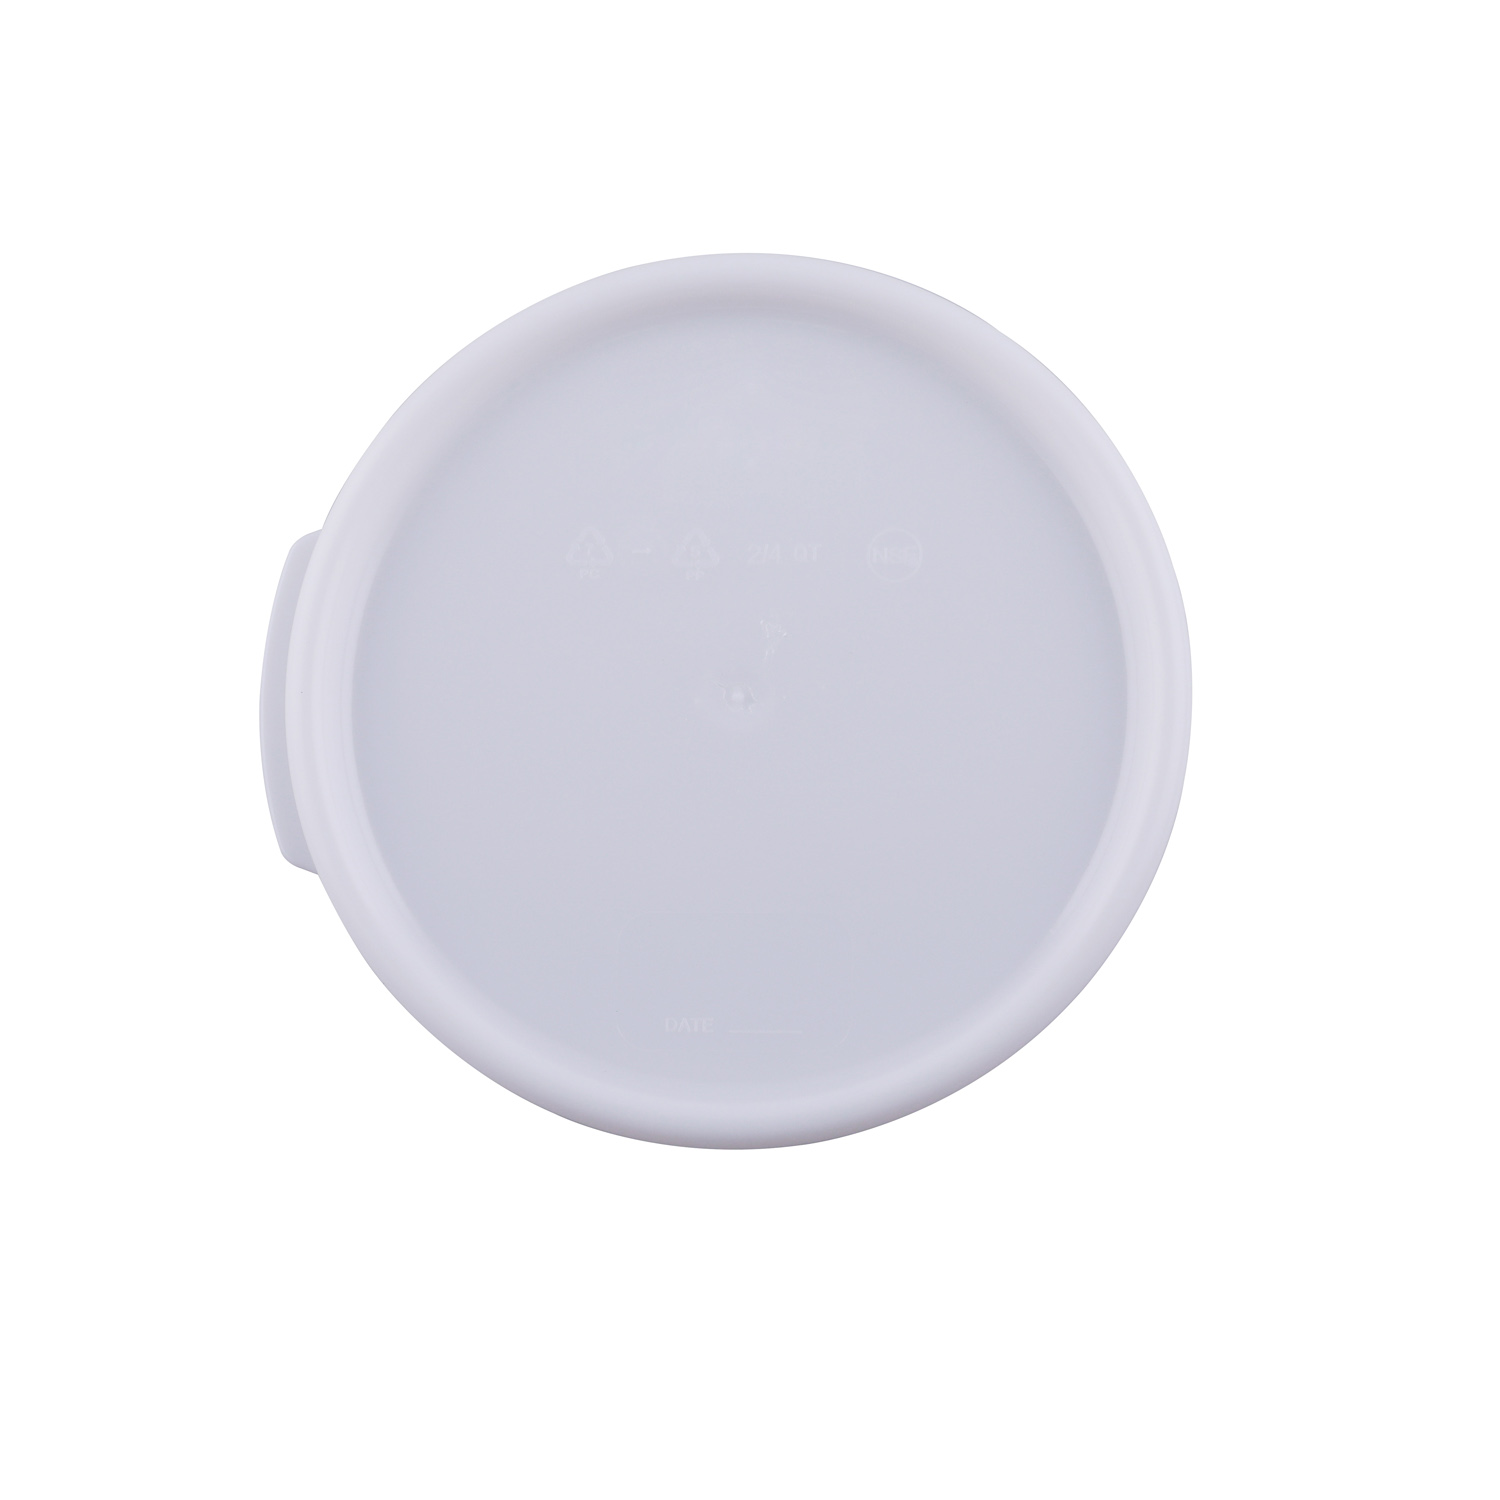 CAC China FS3R-1CV-W Round White Food Storage Container Cover for 1 Qt.